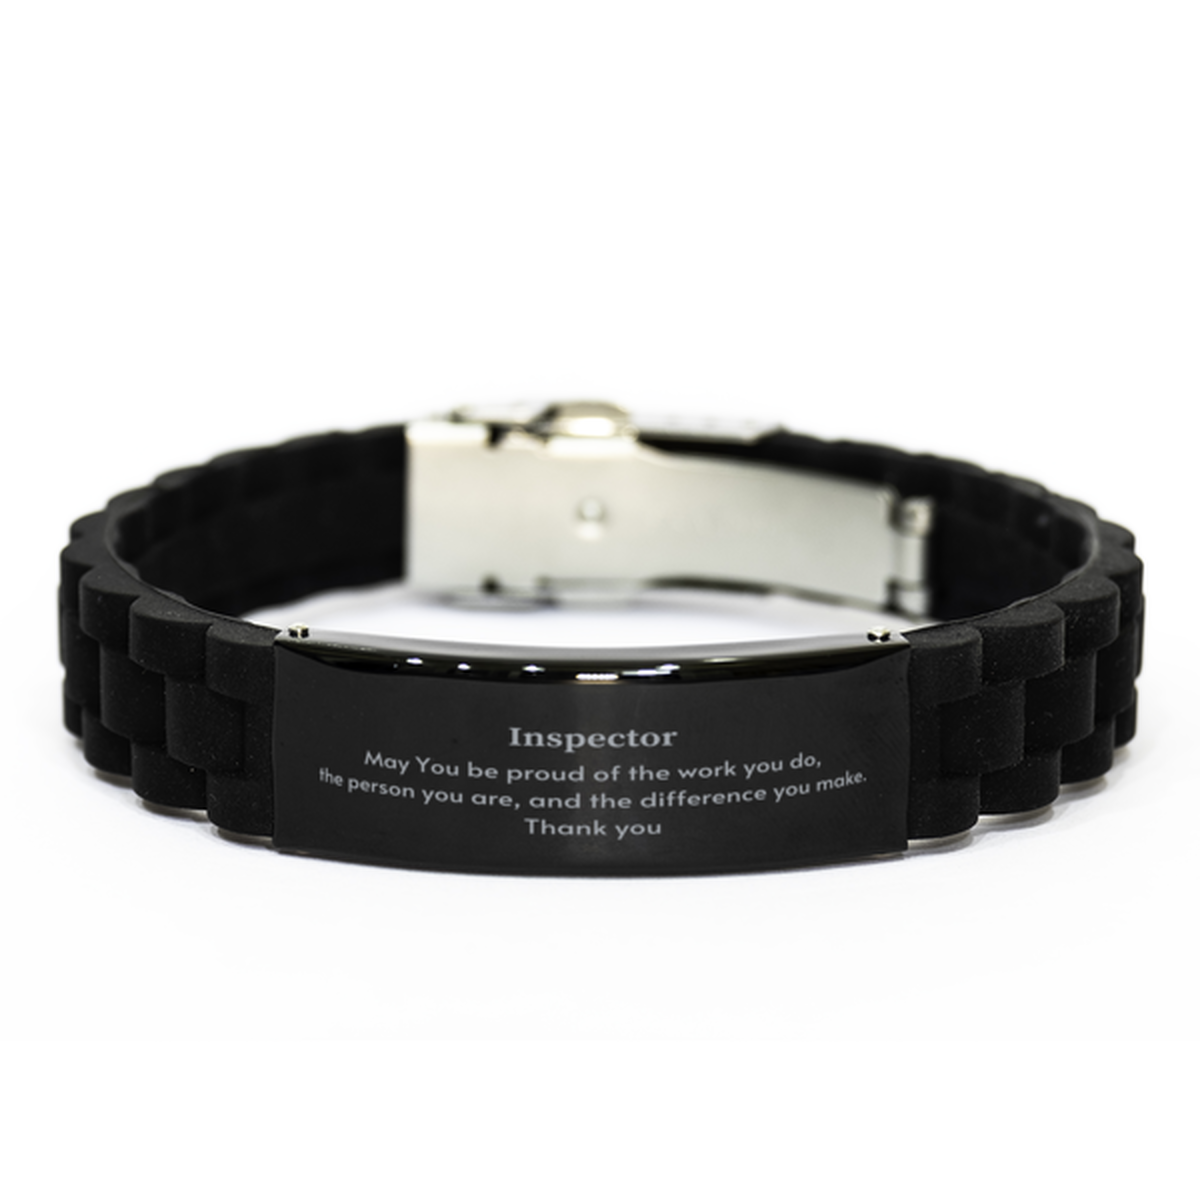 Heartwarming Black Glidelock Clasp Bracelet Retirement Coworkers Gifts for Inspector, Inspector May You be proud of the work you do, the person you are Gifts for Boss Men Women Friends